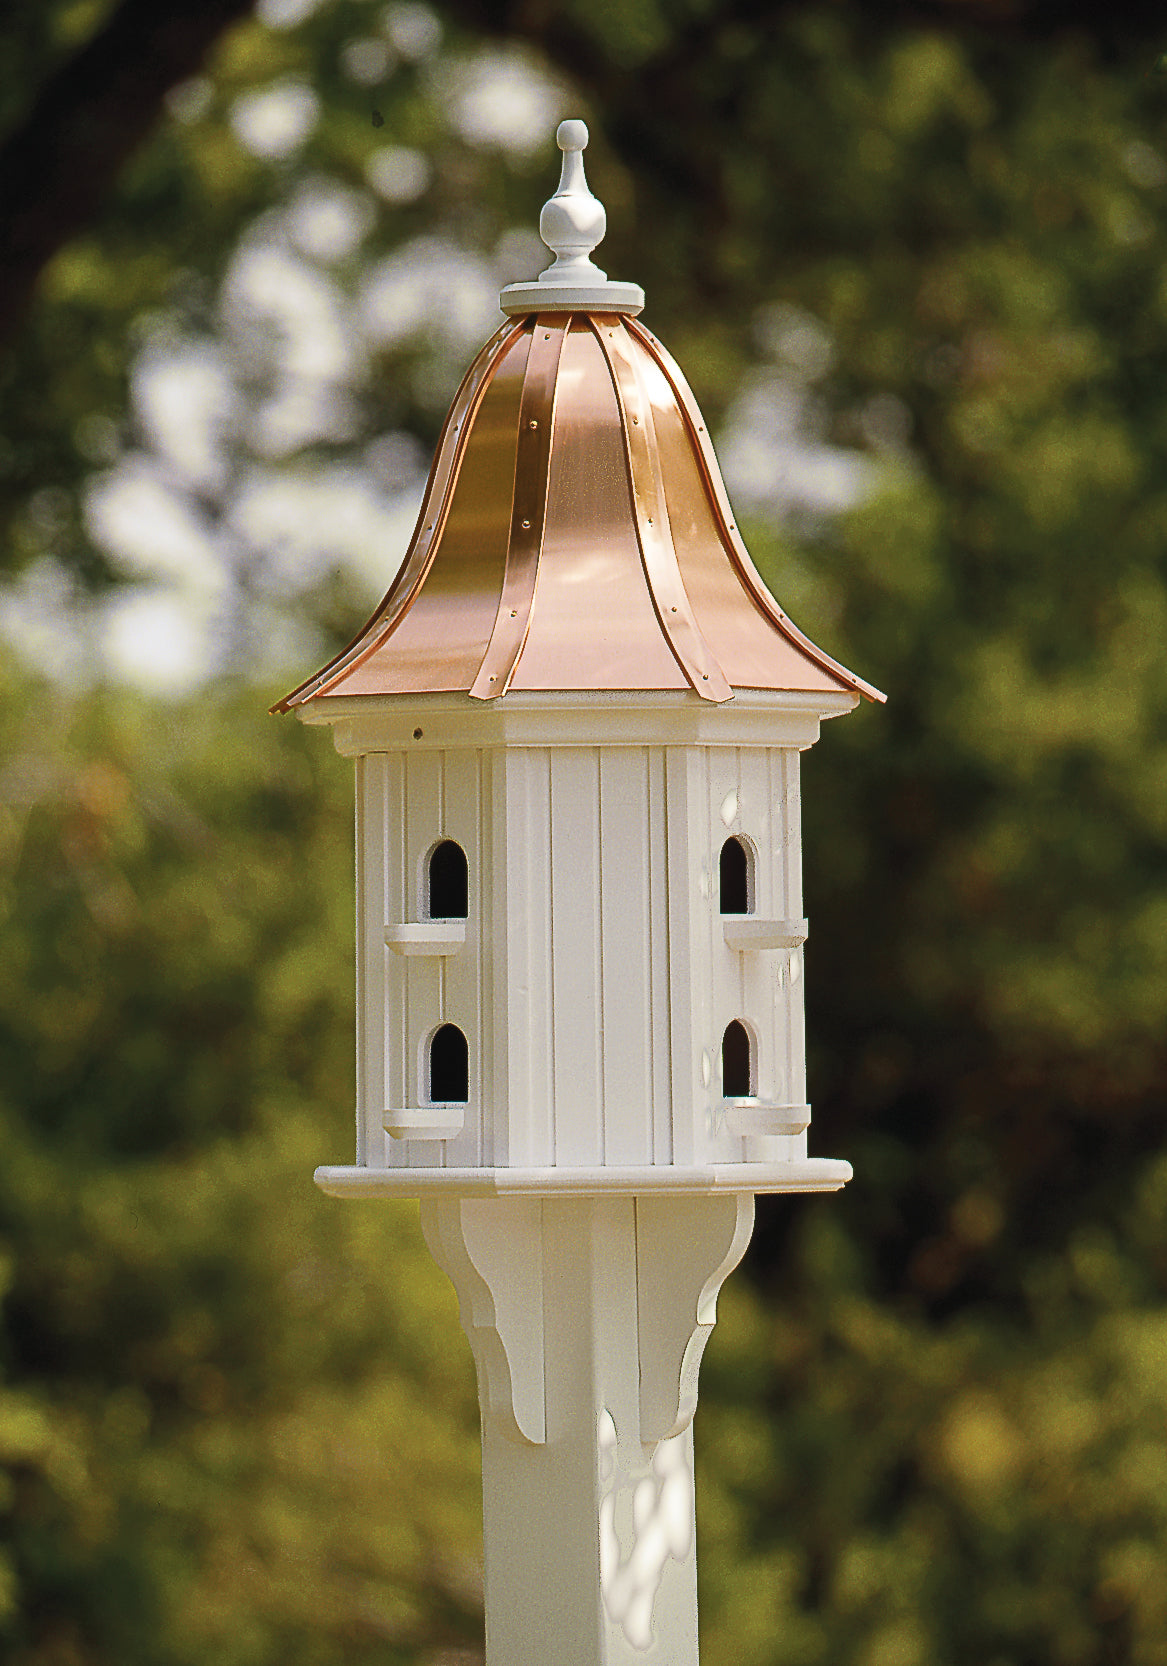 Two Level Birdhouse with Copper Roof